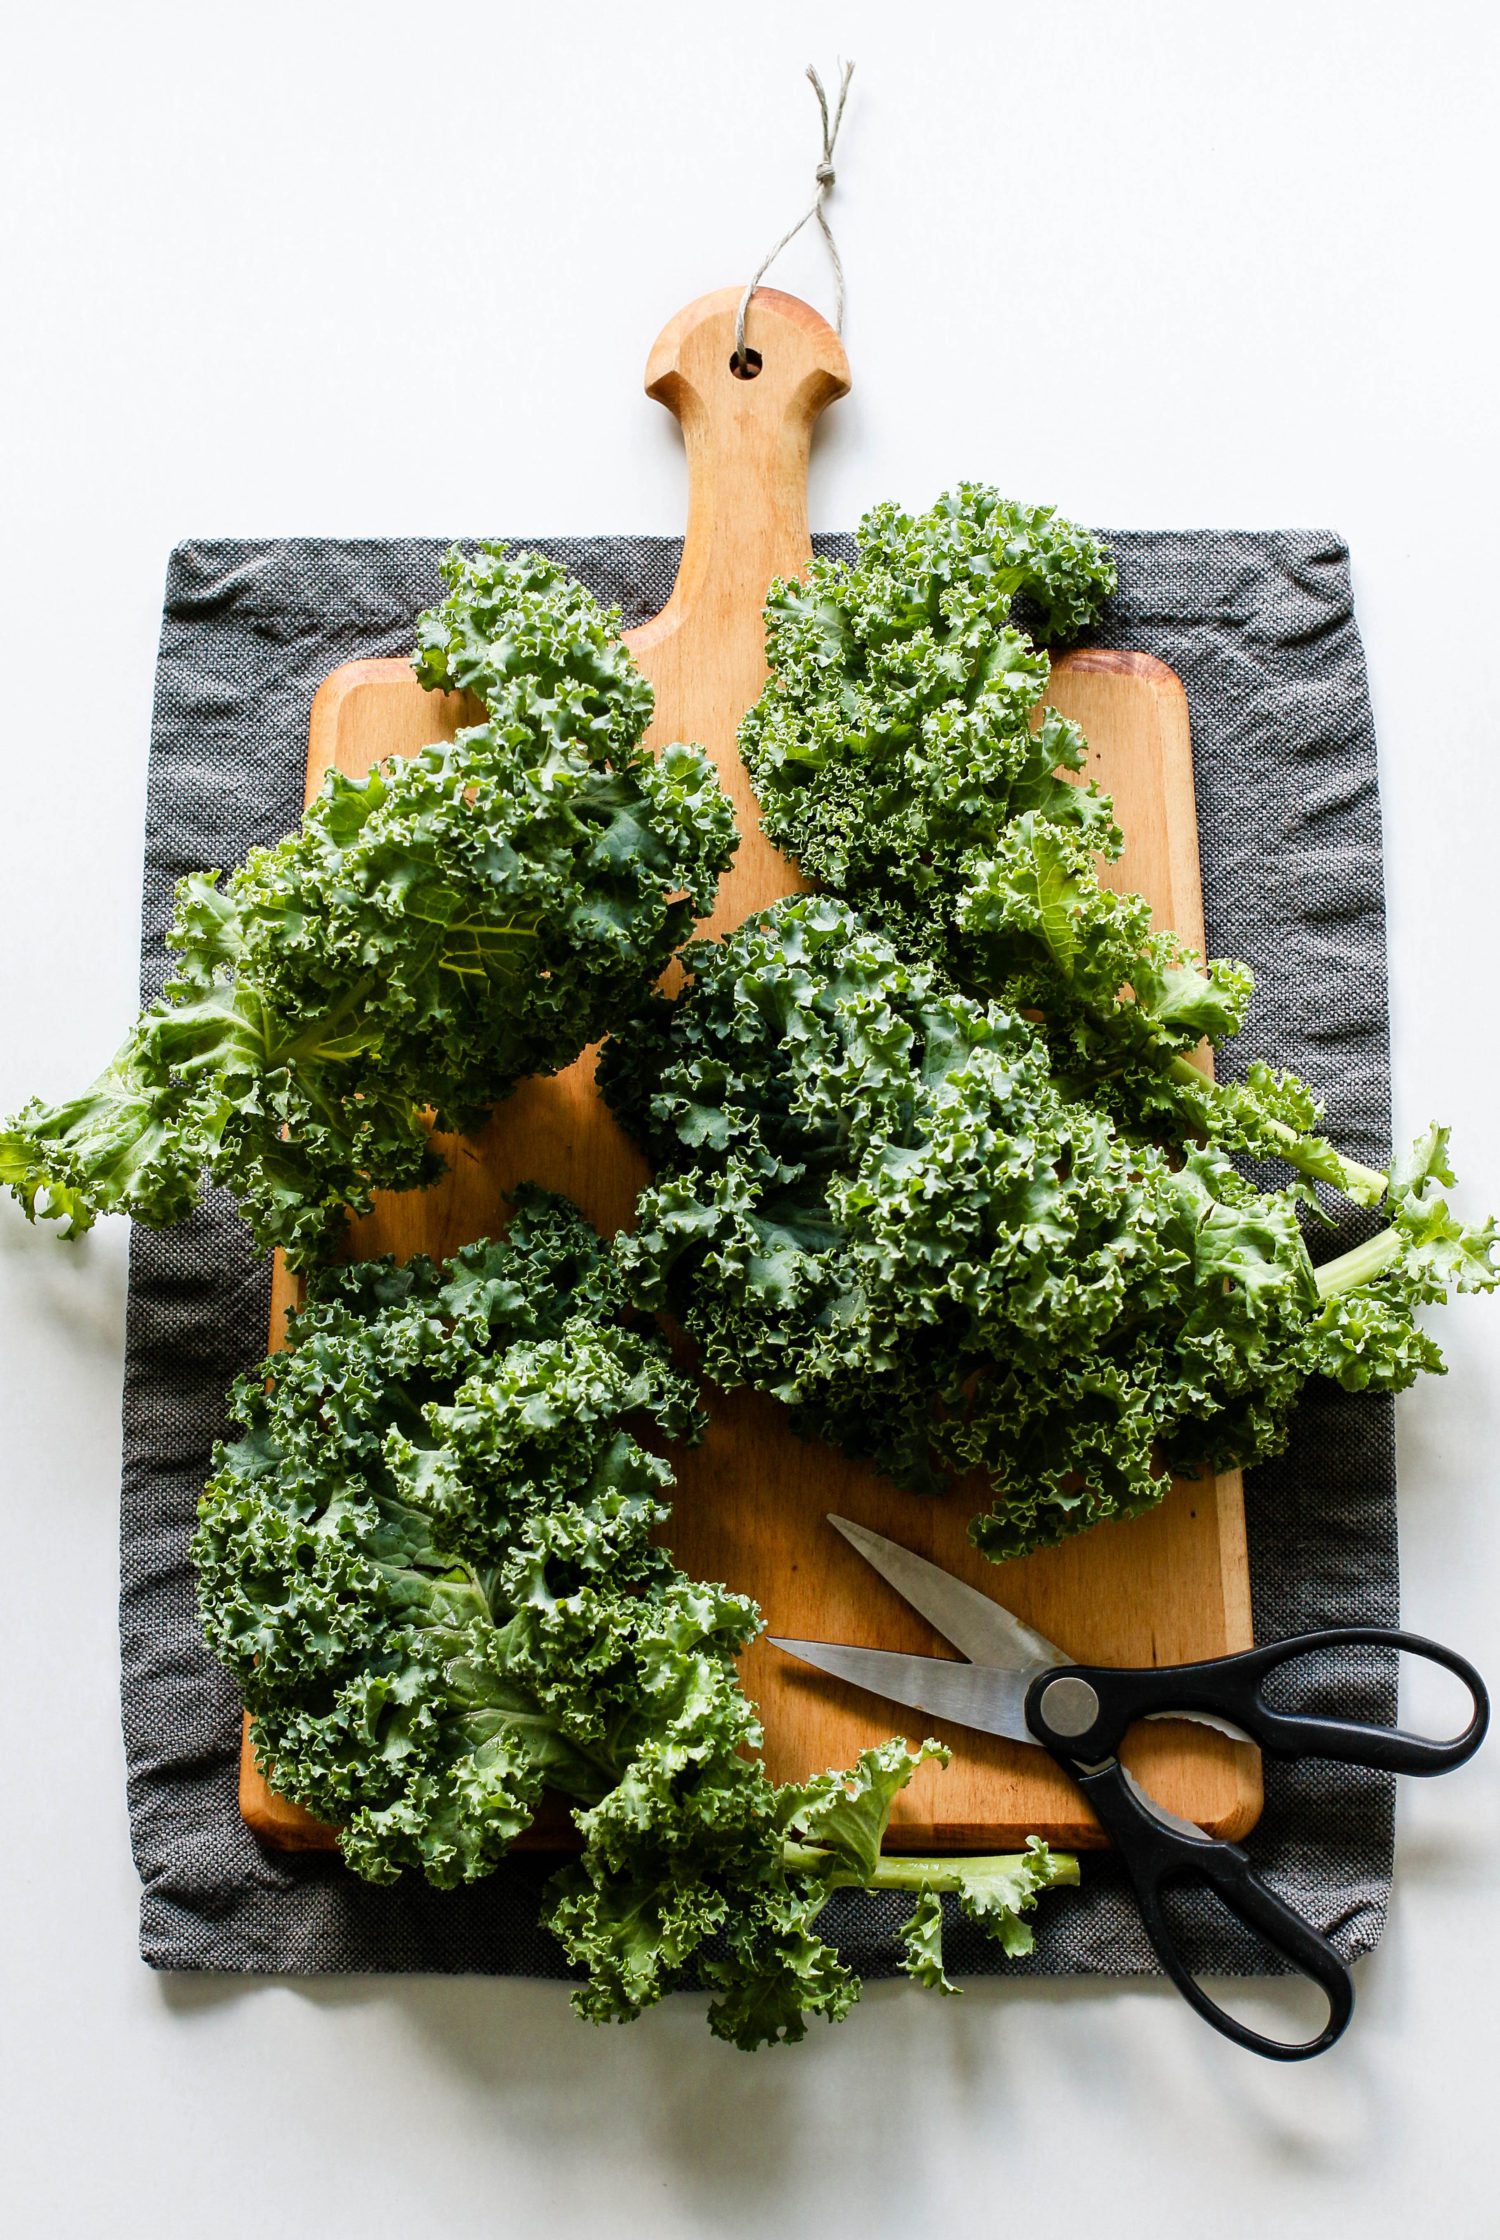 My Go-To Kale Salad by Flora & Vino